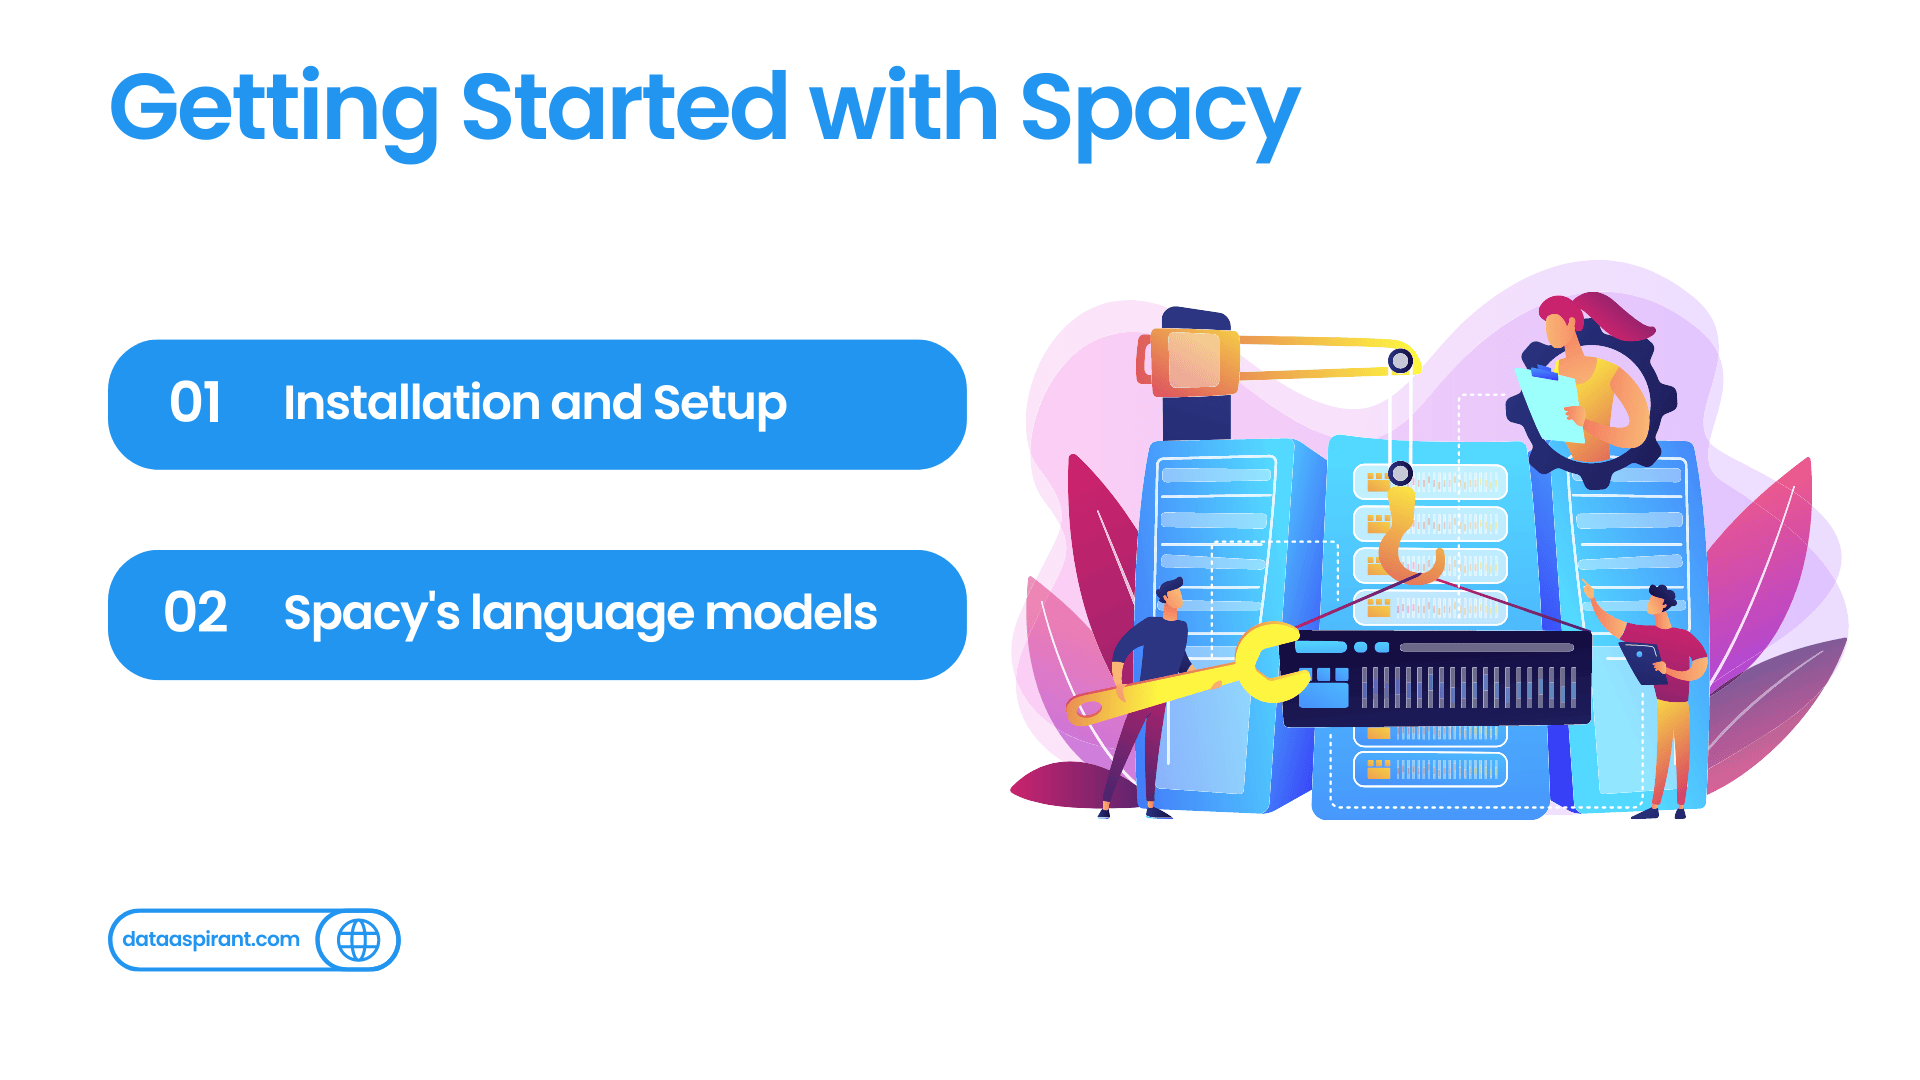 Getting Started with Spacy